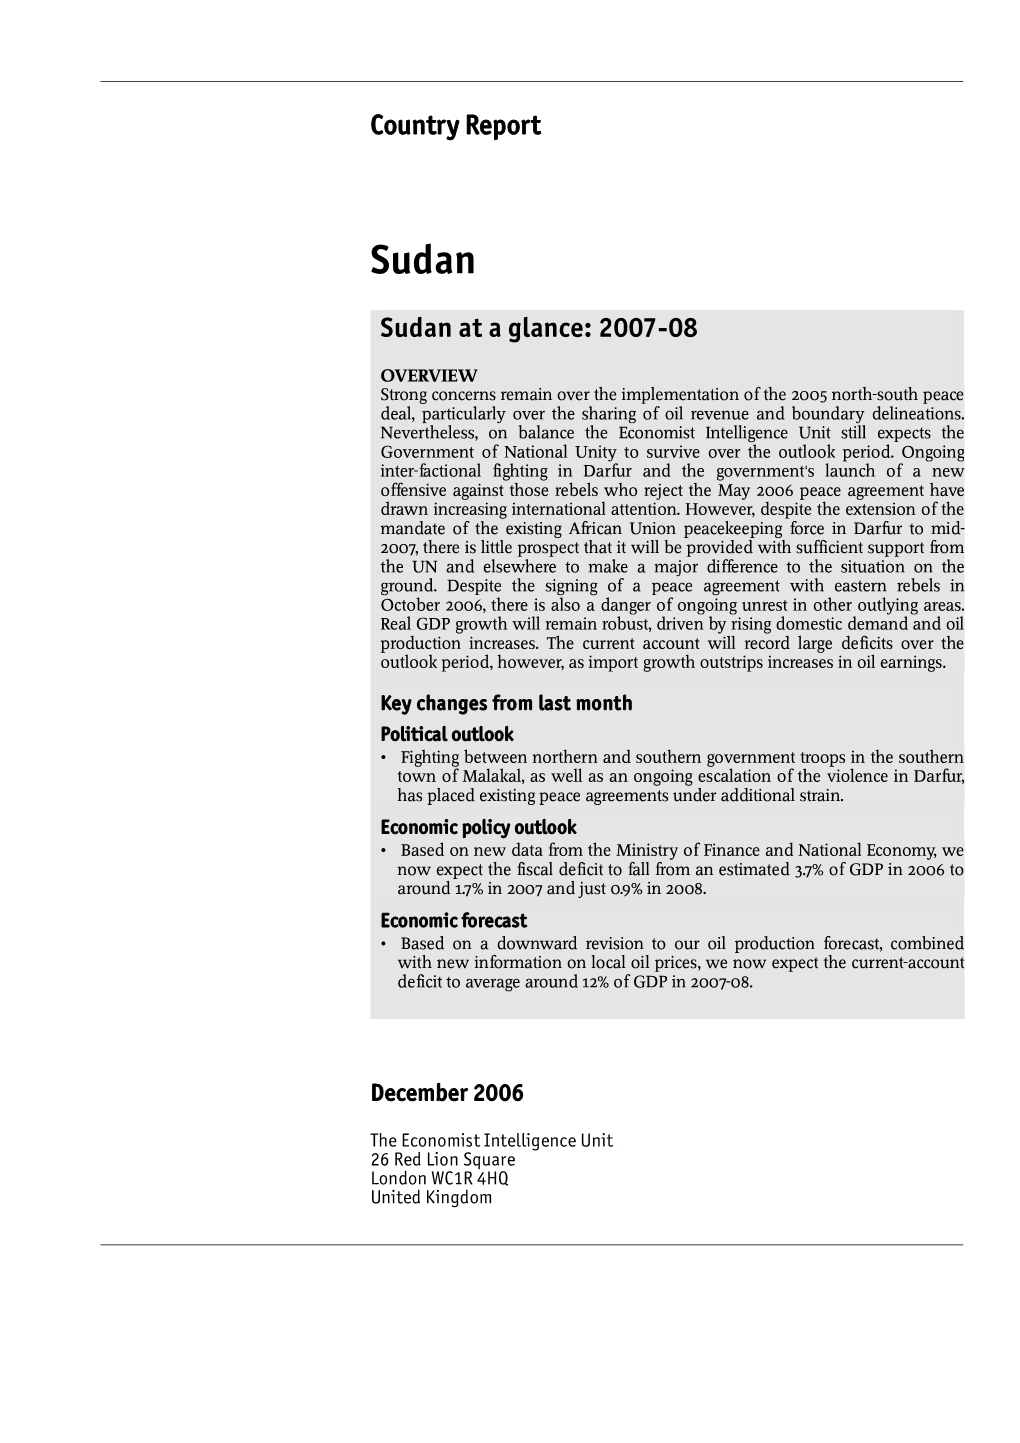 Country Report Sudan at a Glance: 2007-08